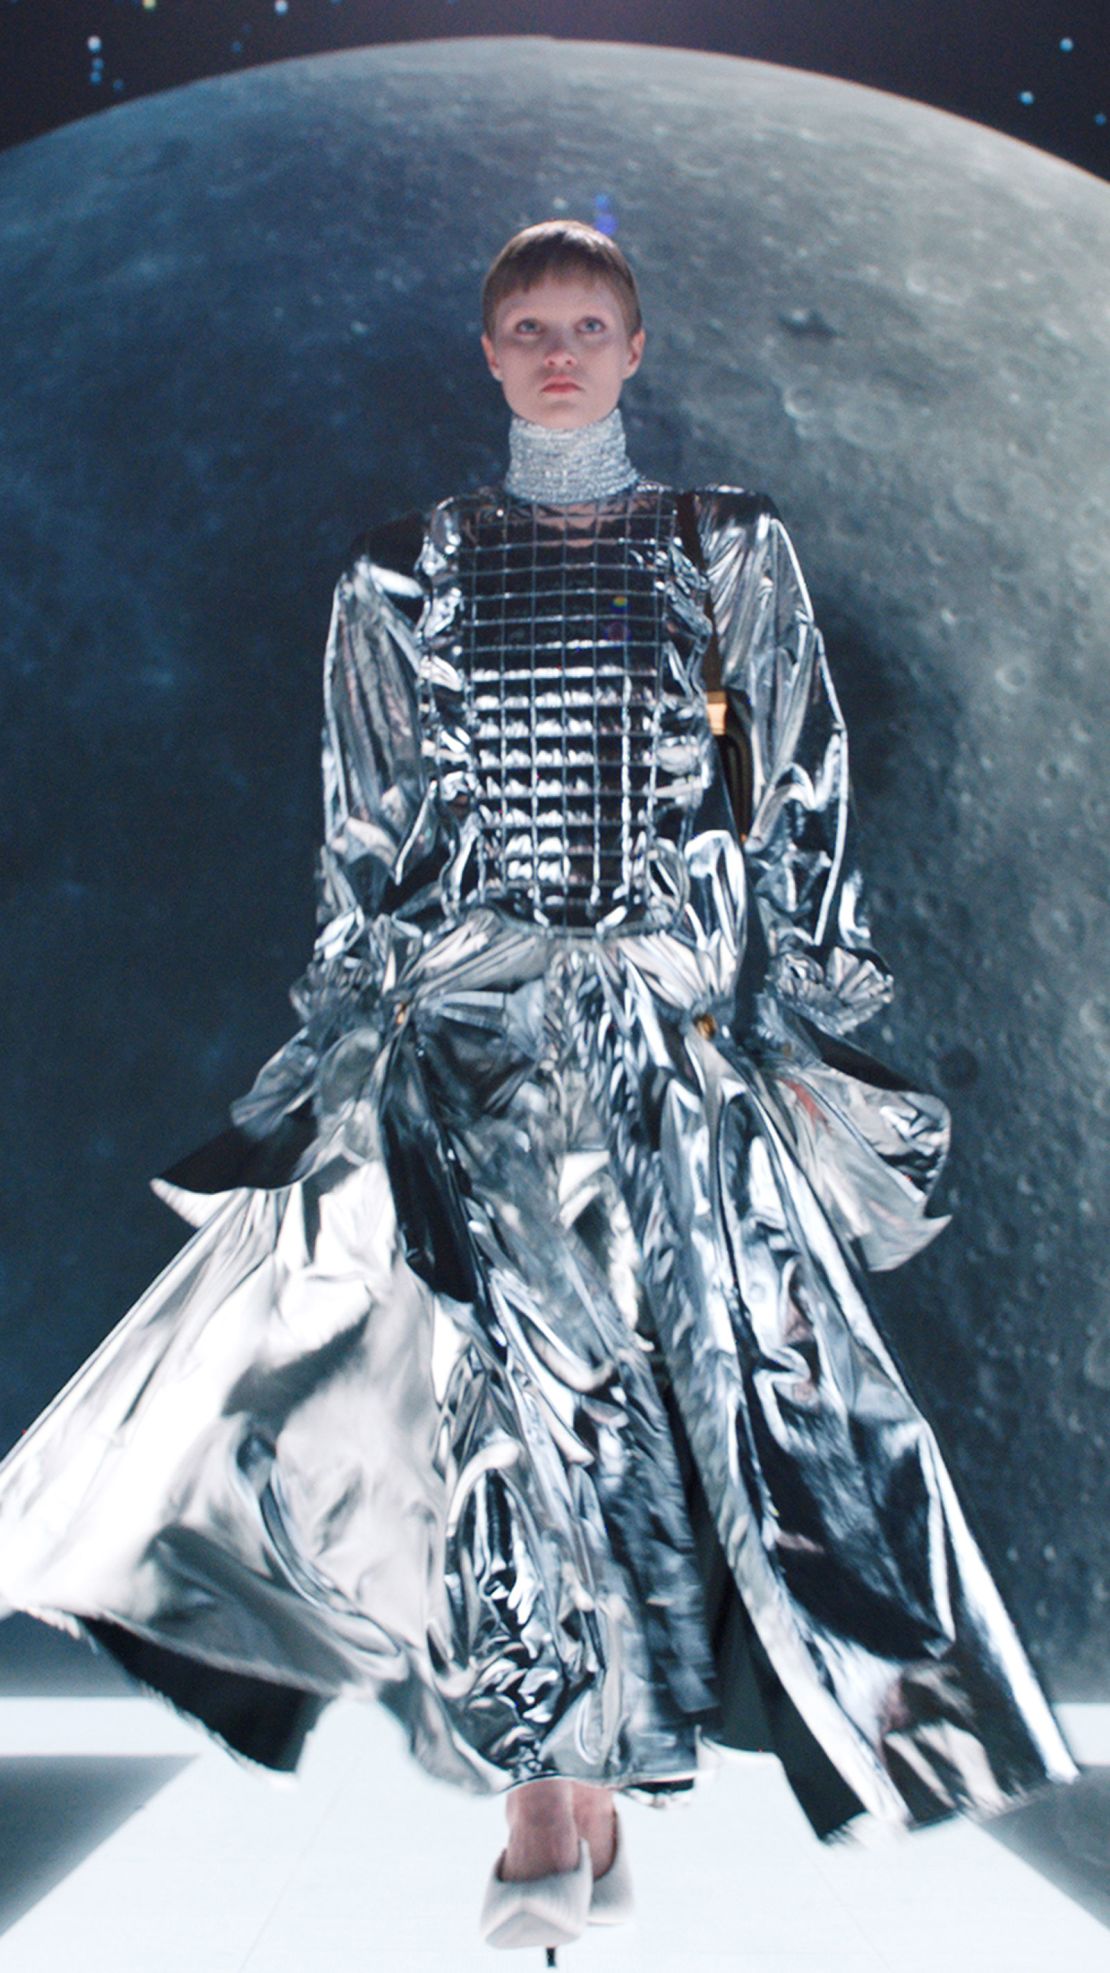 Models carried duffel bags and suitcases as they marched down a luminous catwalk that looped around the moon.